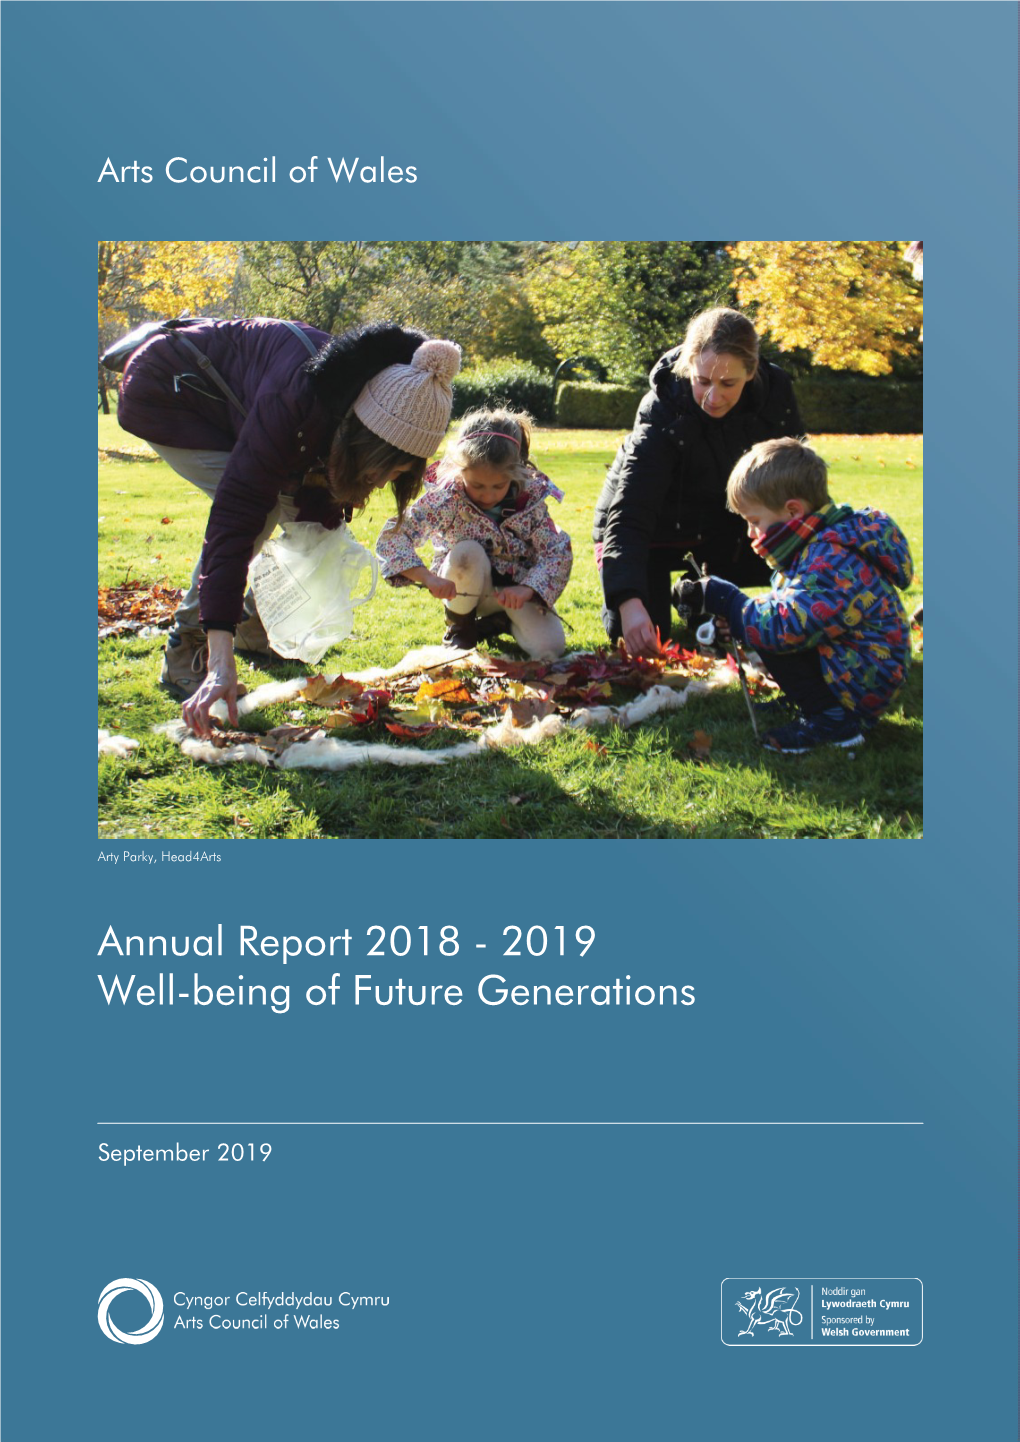 Annual Report 2018 - 2019 Well-Being of Future Generations